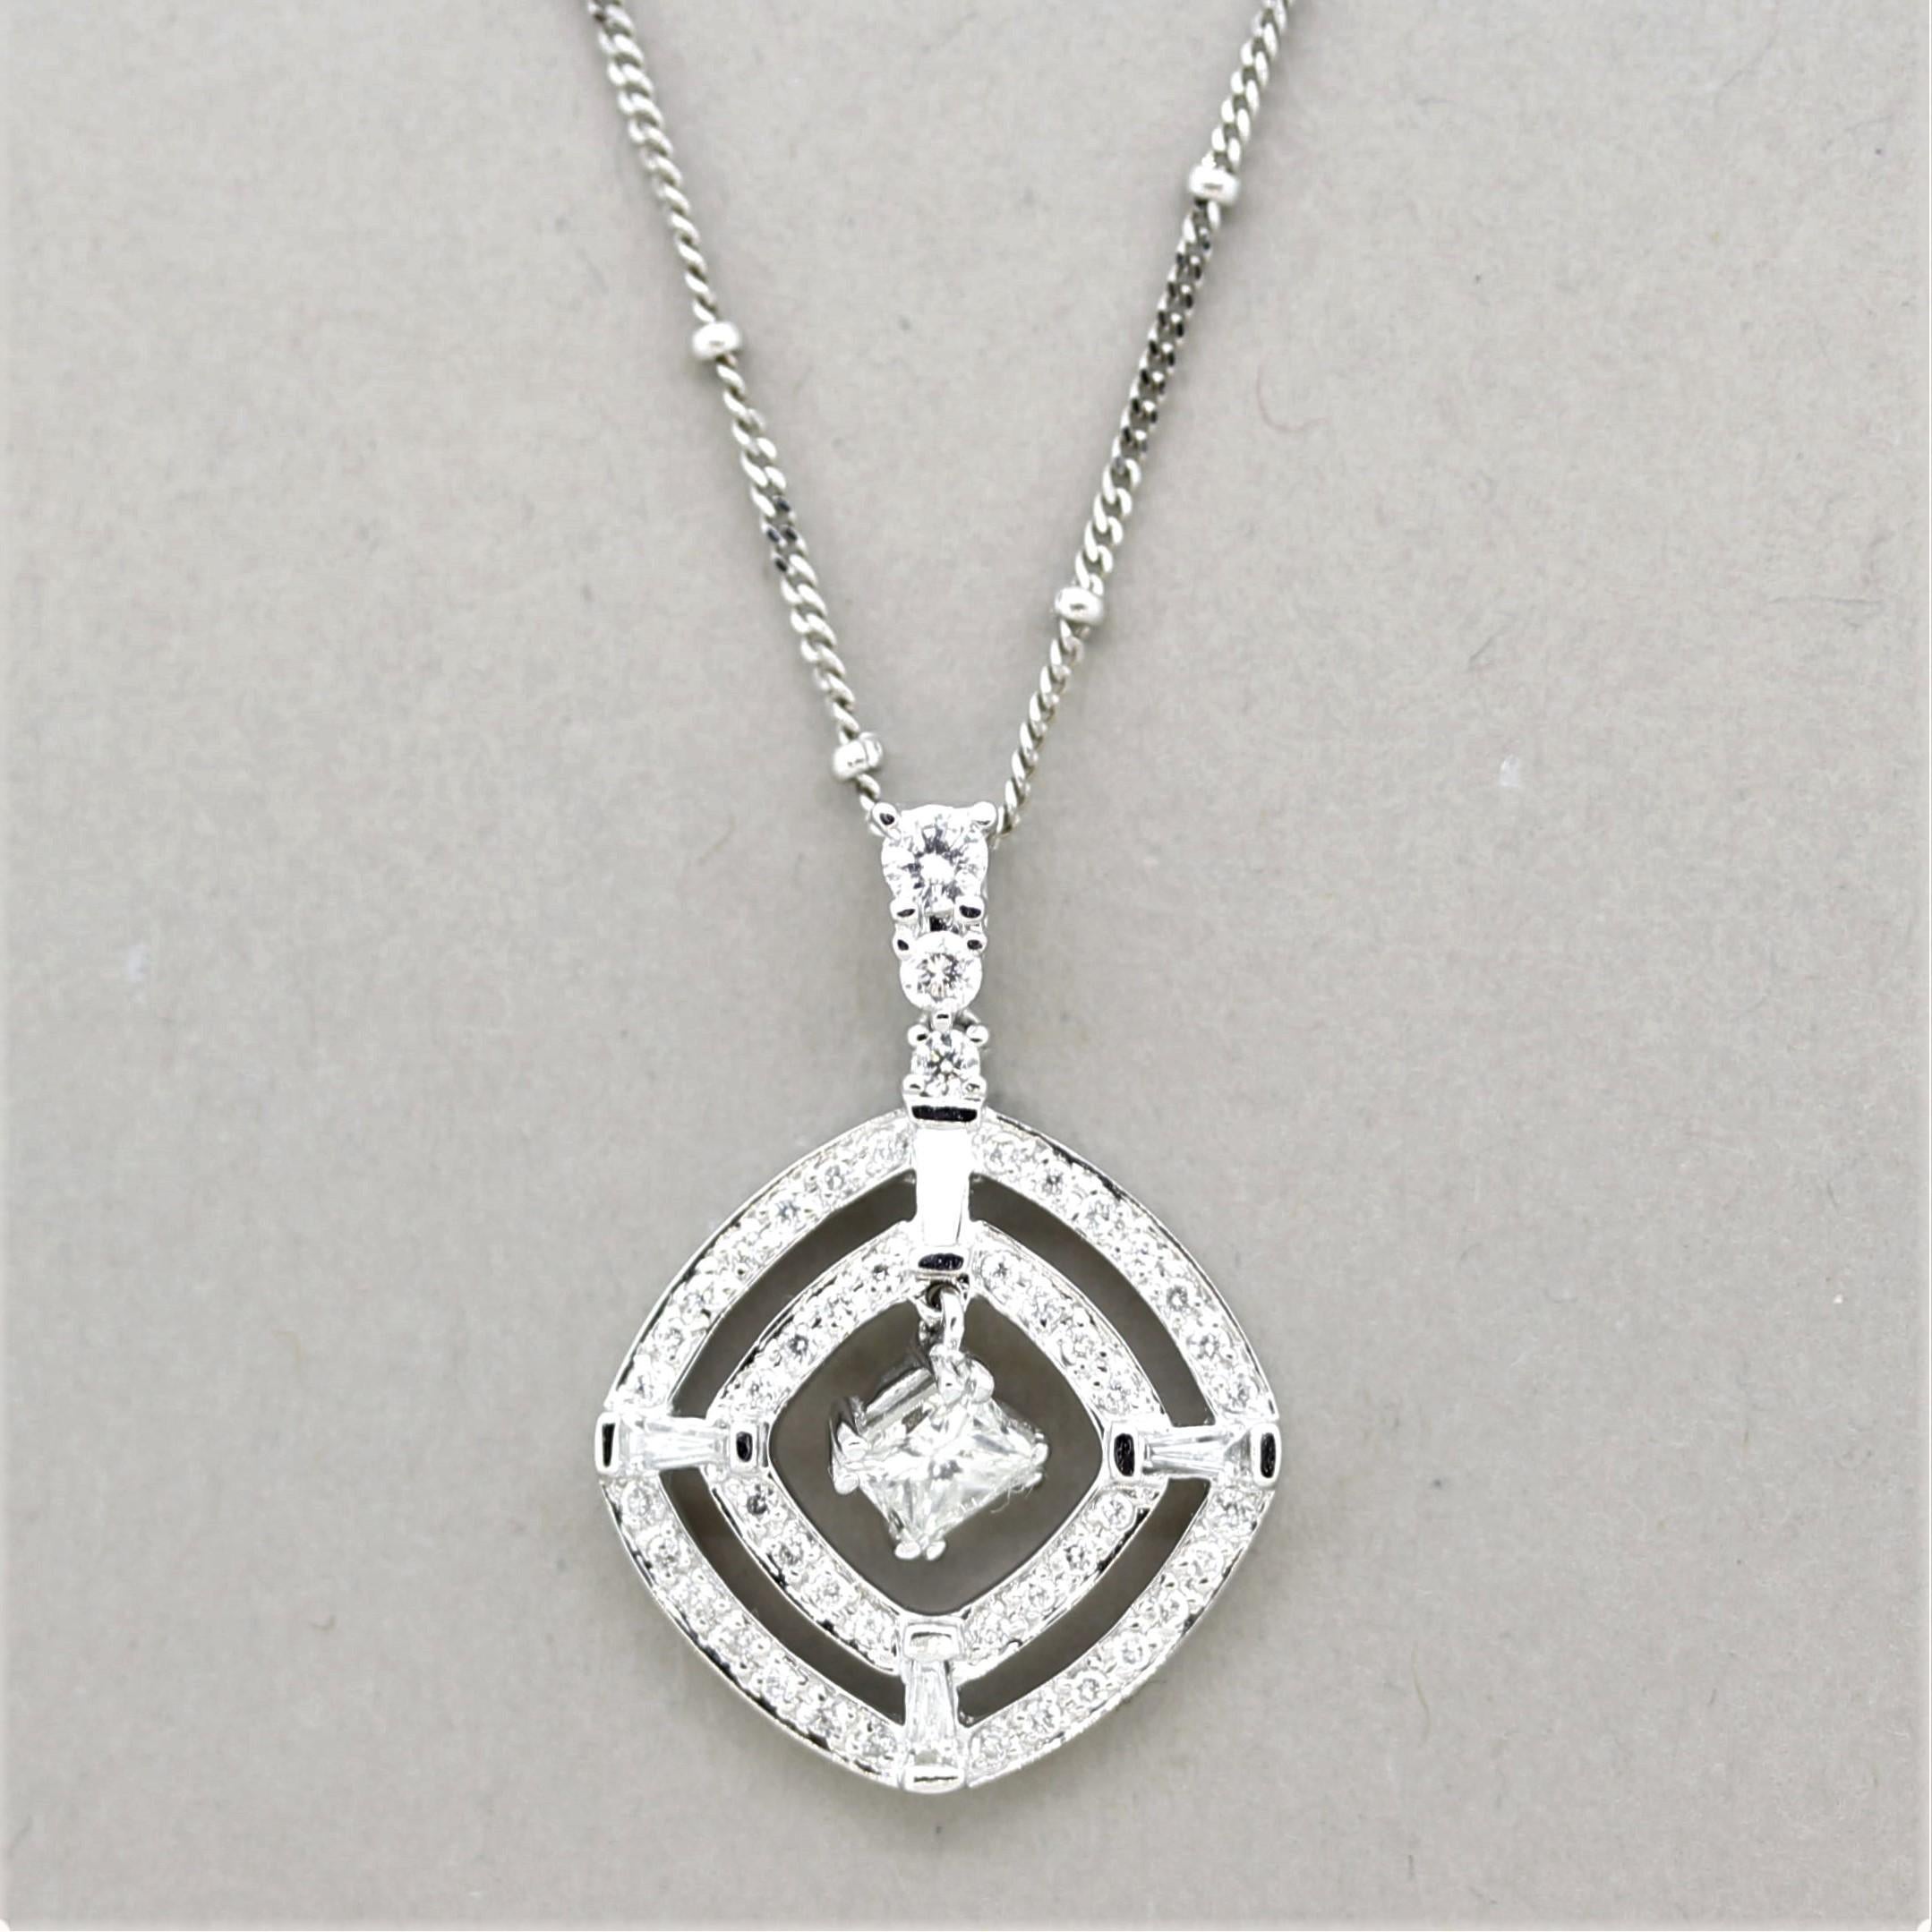 A fun and stylish diamond pendant! It features a large single princess-cut diamond weighing 0.42 carats and is drop-set in the middle of the pendant. It is accented by two outer rows of round brilliant-cut and baguette-cut diamonds which weigh a